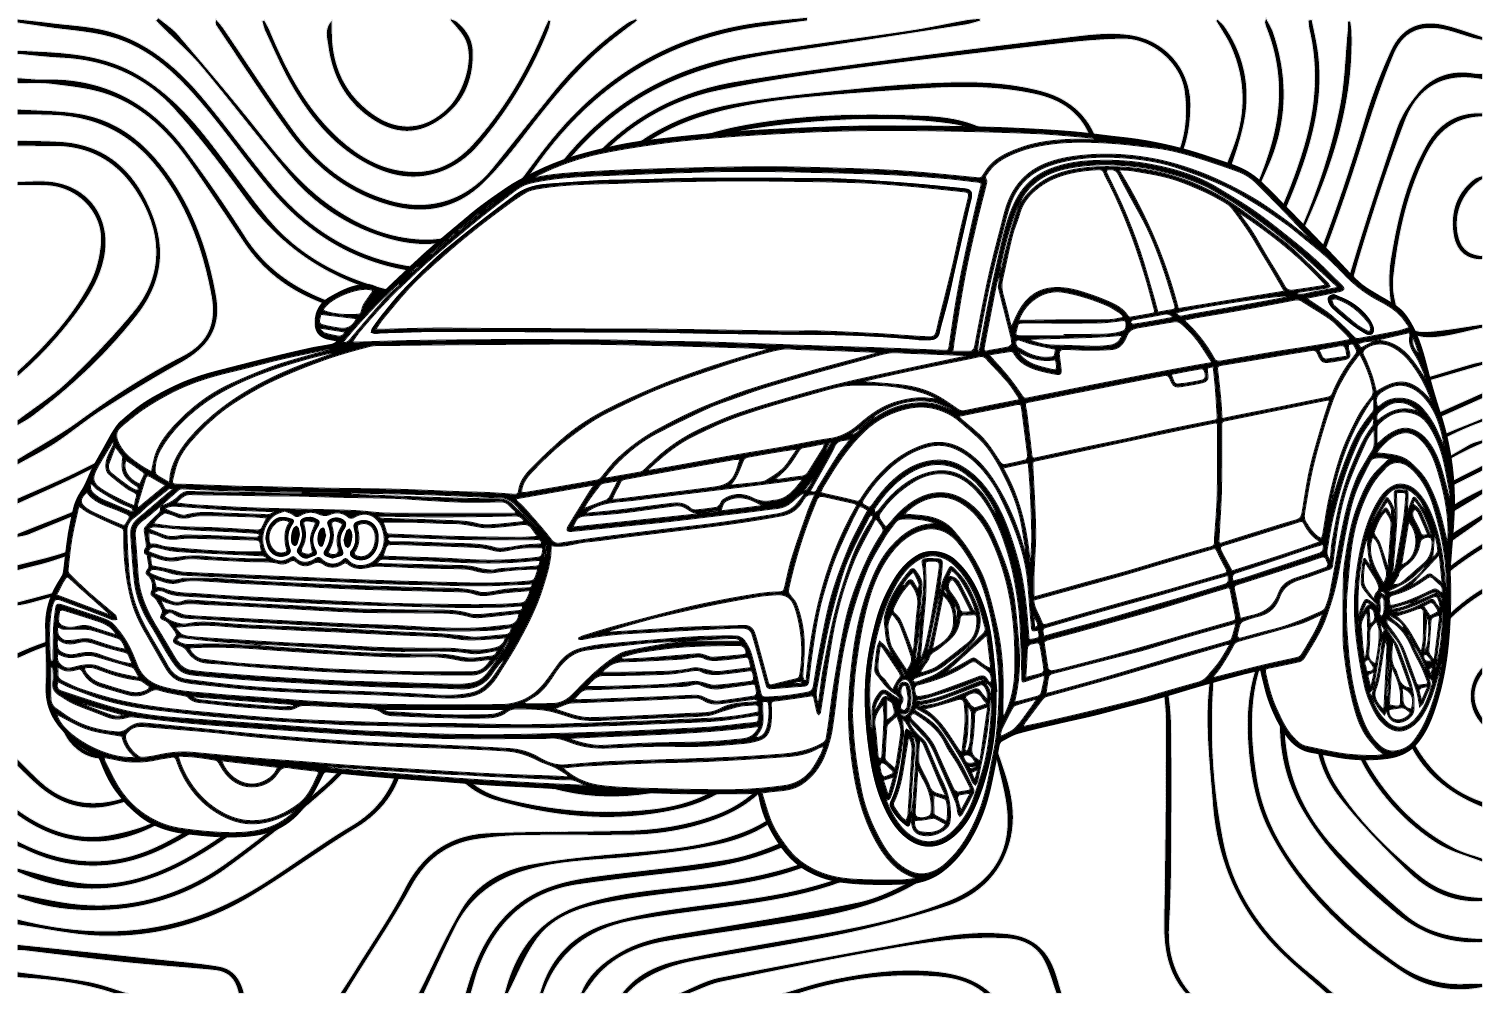 Audi TT Offroad Coloring Page from Audi